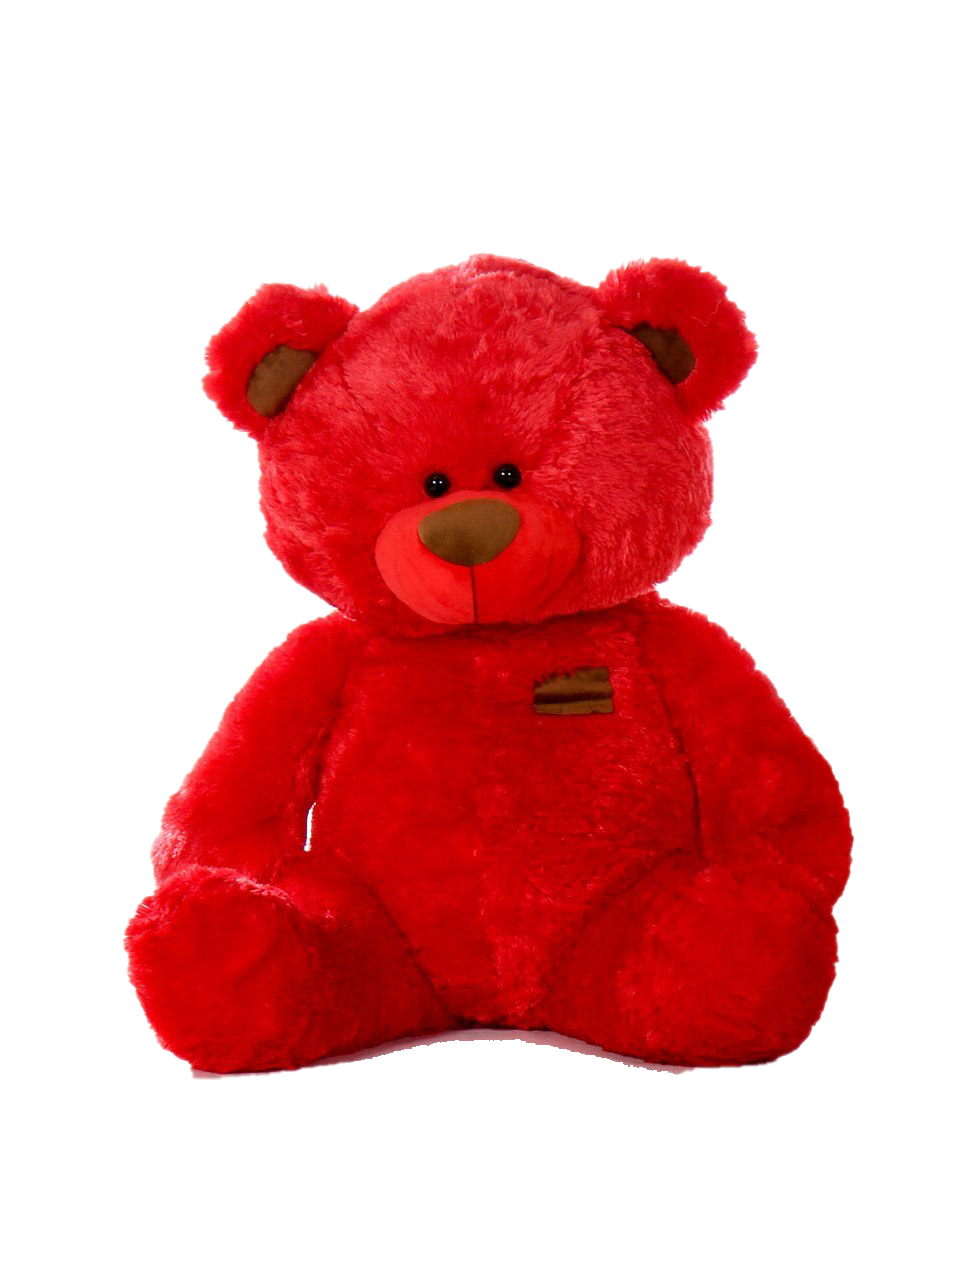 Red Teddy Bear PNG Photos